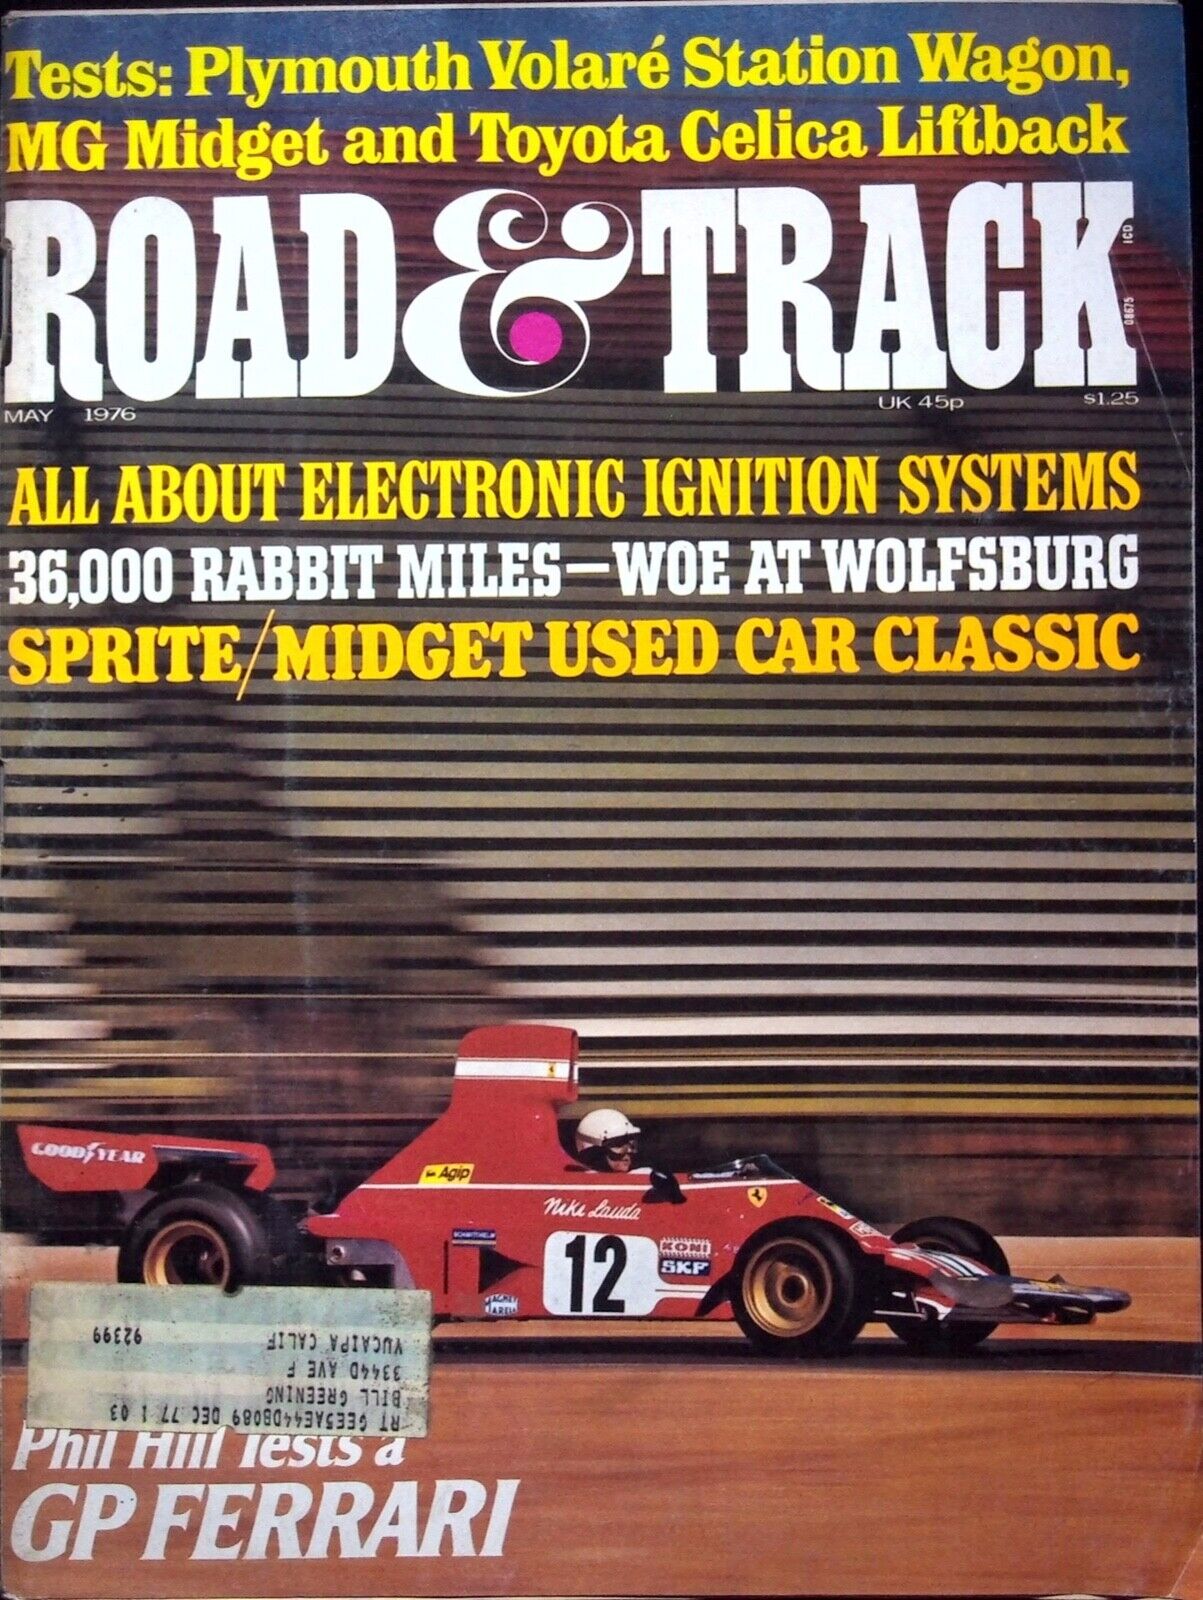 ELECTRONIC IGNITION SYSTEMS - ROAD & TRACK MAGAZINE, APRIL 1976 VOL. 17. NO.8